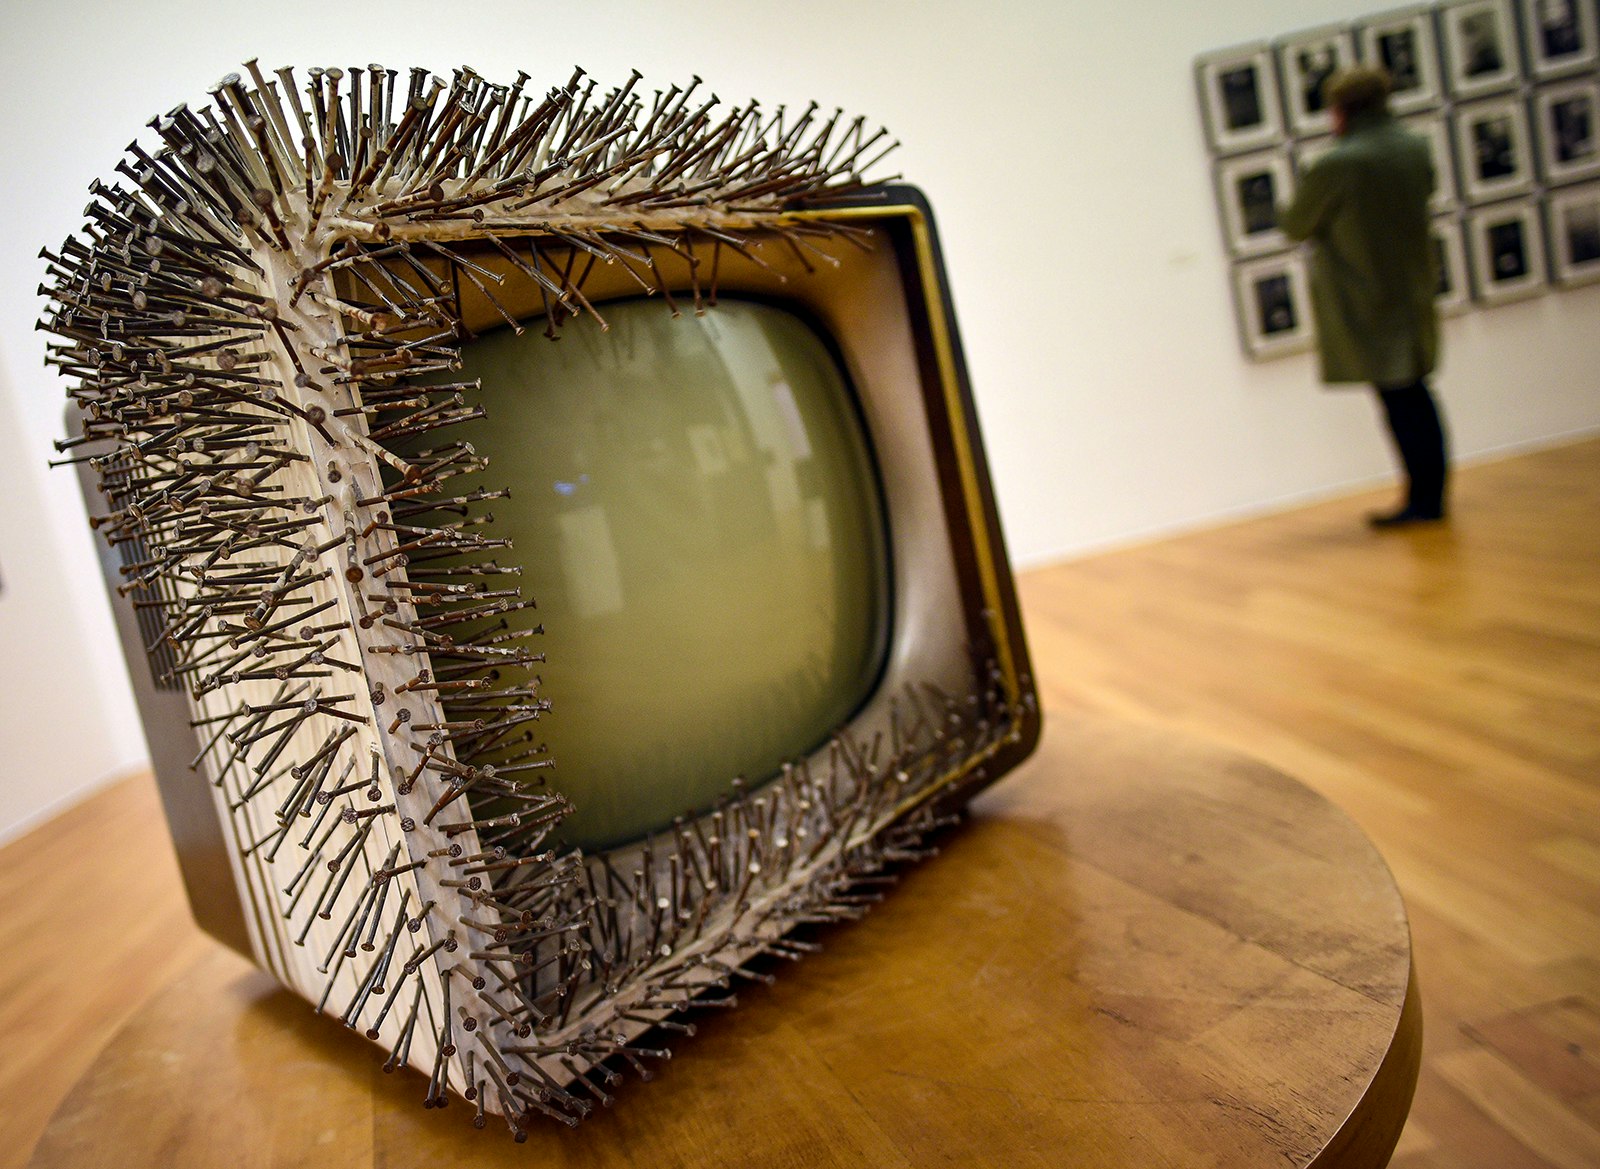 A box television with a cluster of needles sticking out of the top, bottom, and left side.